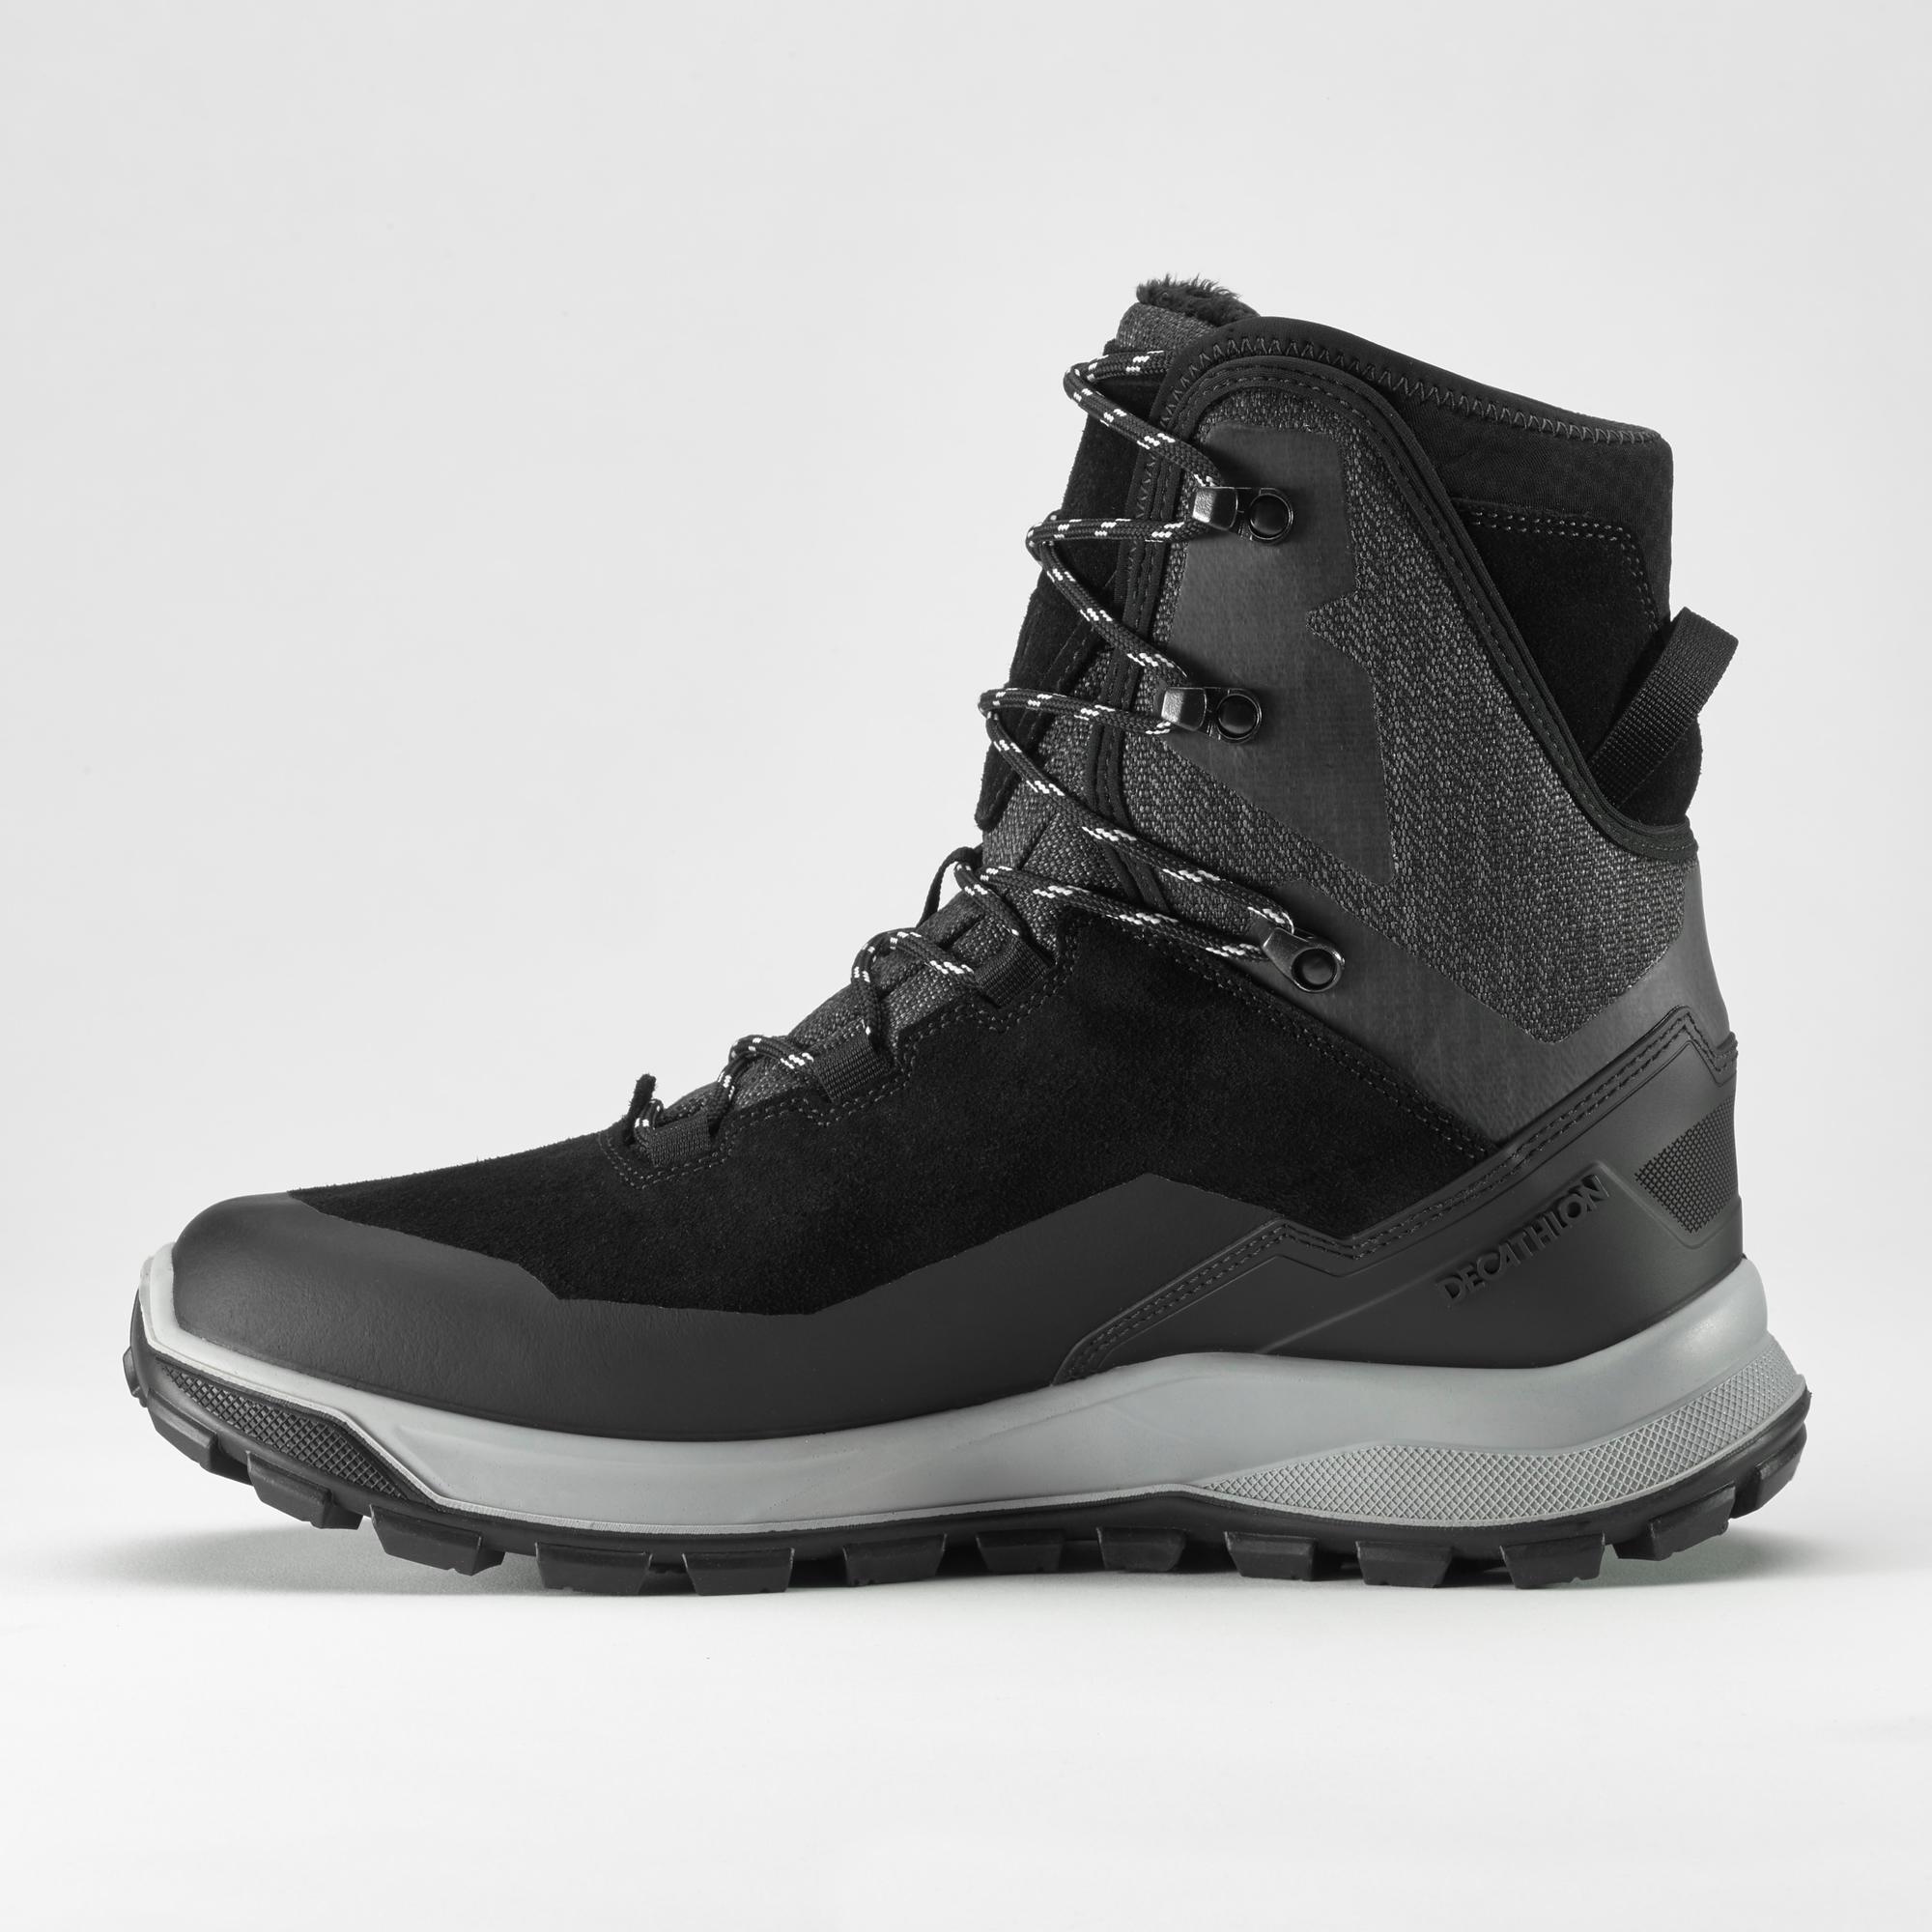 Men’s Warm and Waterproof Leather Hiking Boots - SH900 high 3/5